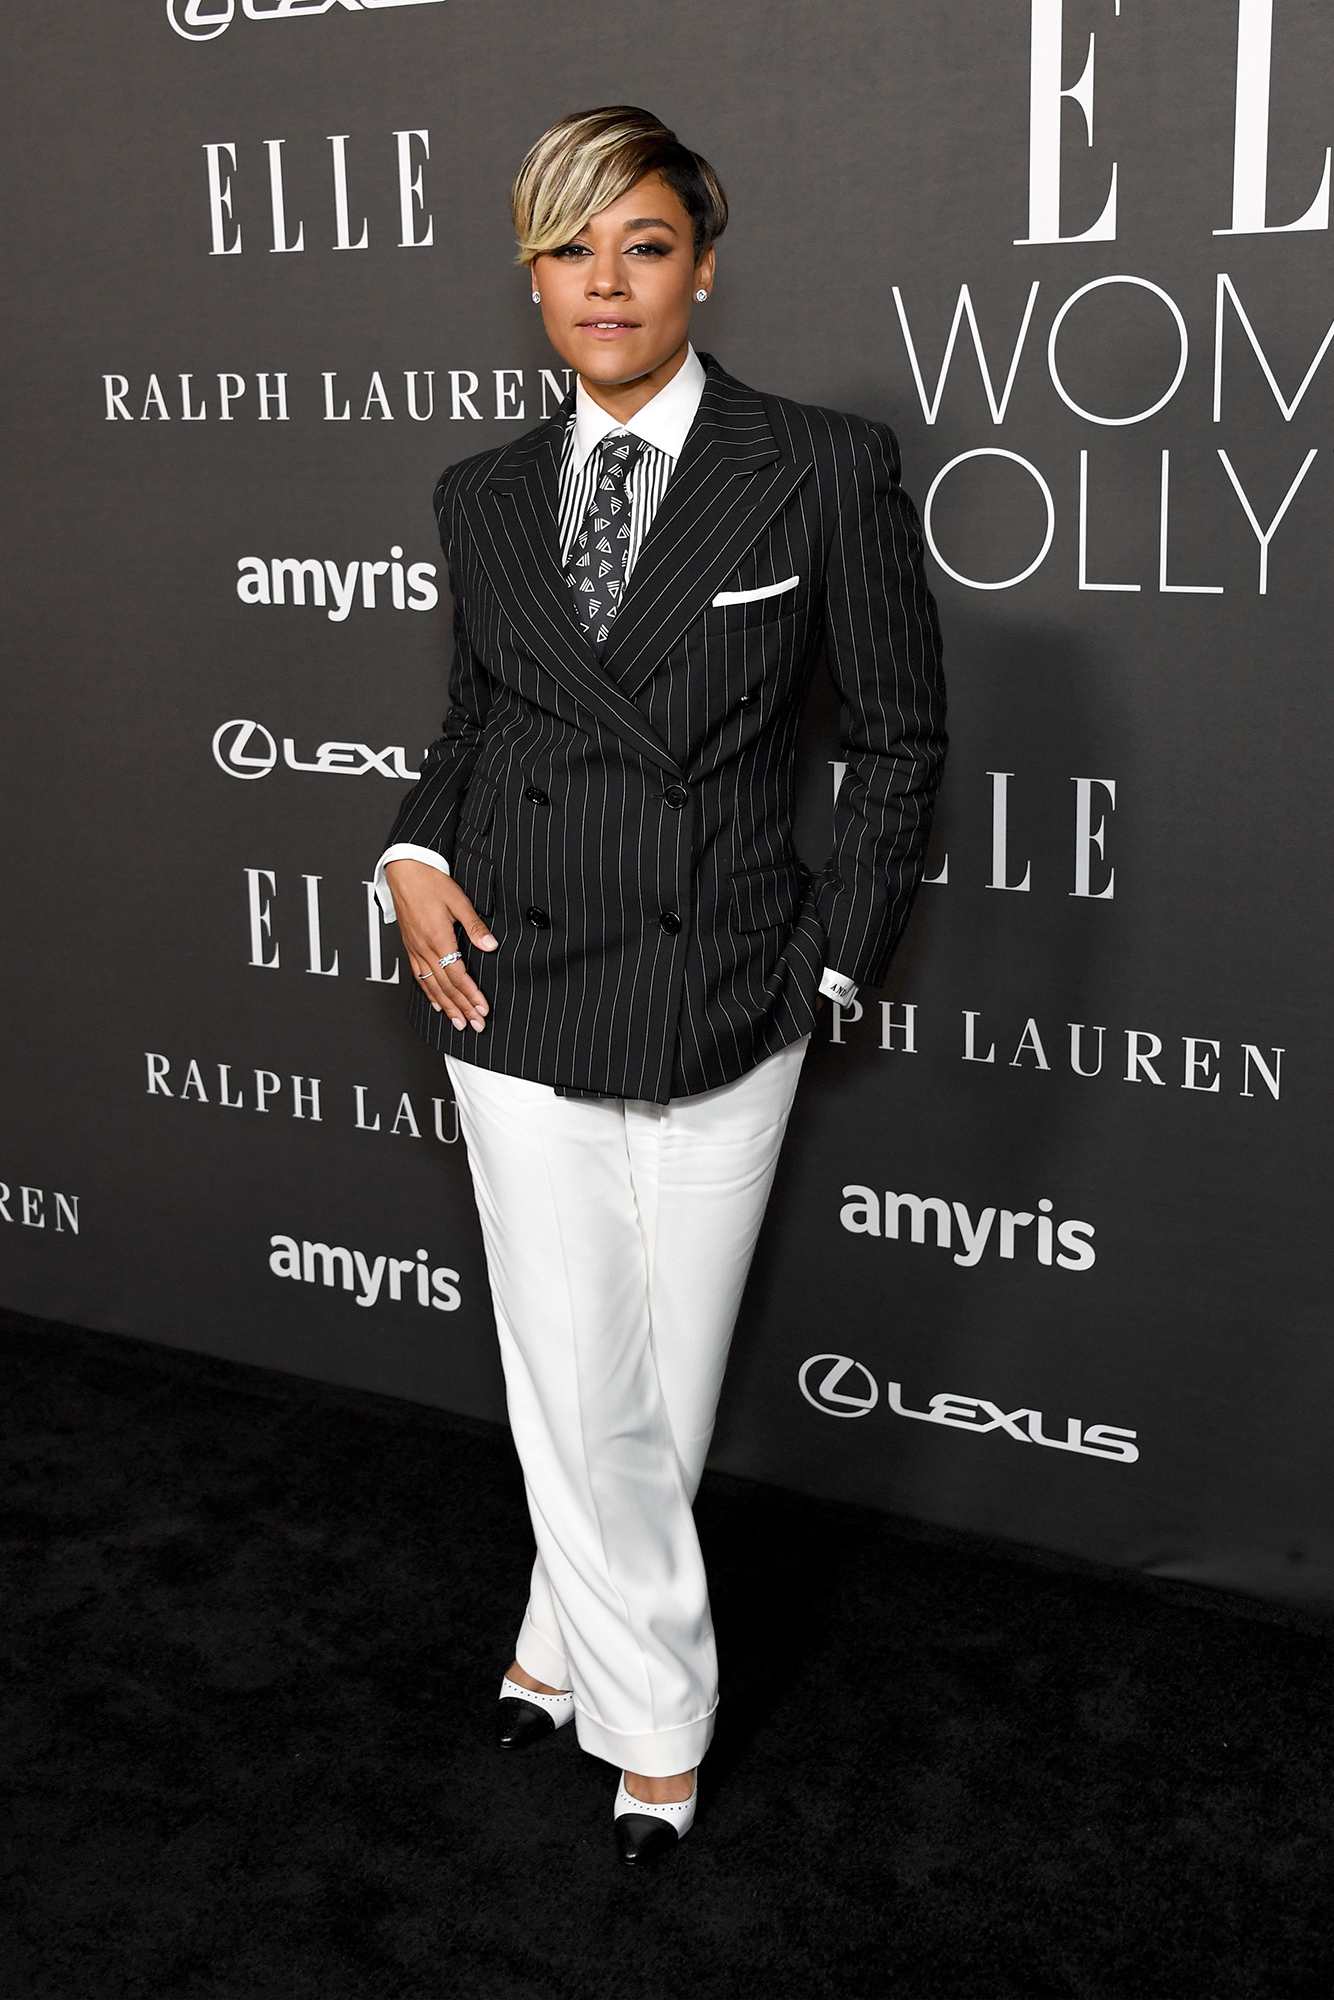 Ariana DeBose wears Ralph Lauren Collection at the Elle Women in Hollywood 2022 celebration.